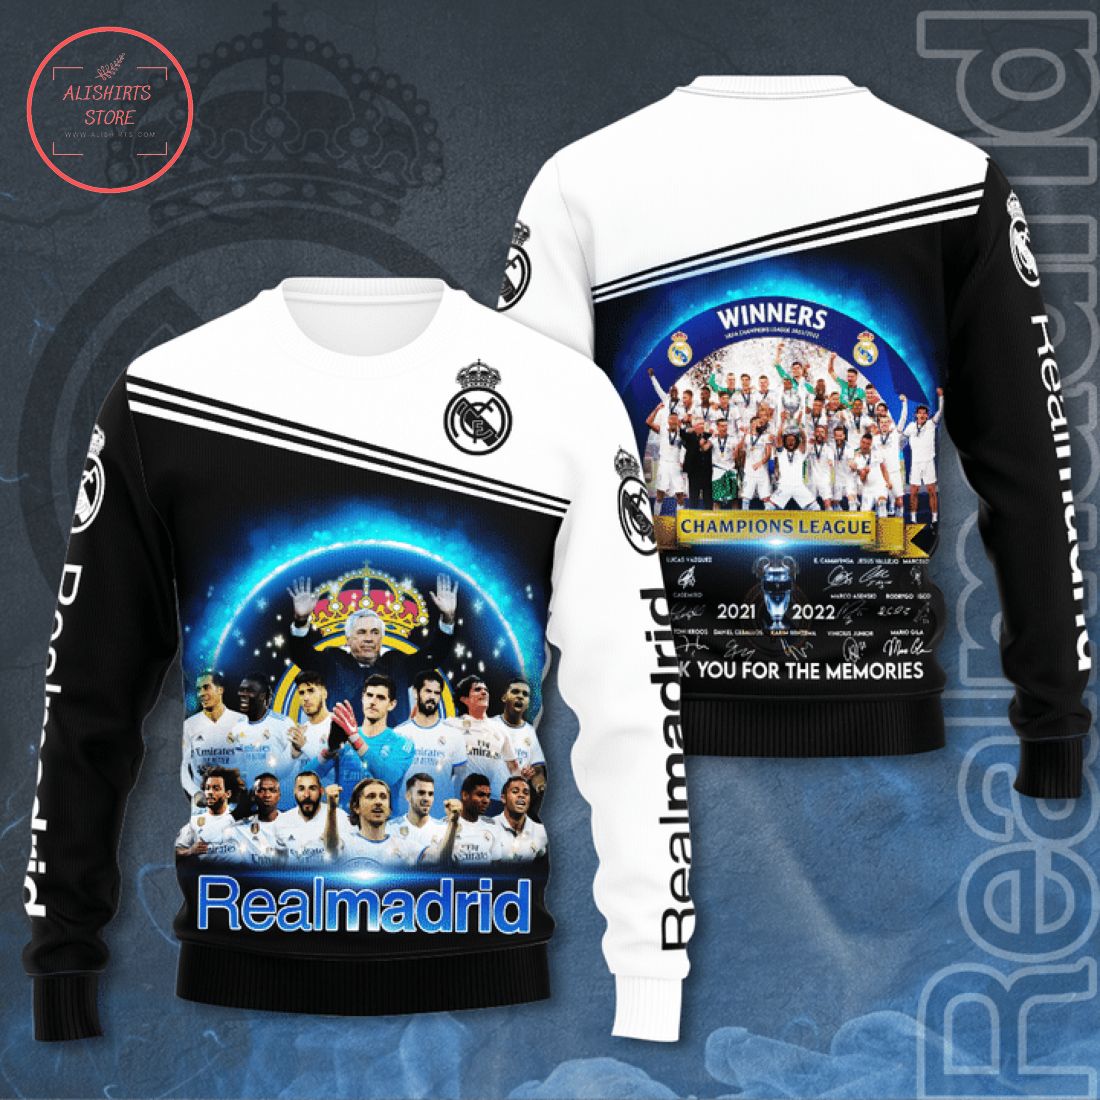 Real Madrid Champions League 2022 Thank You for the Memories Shirt